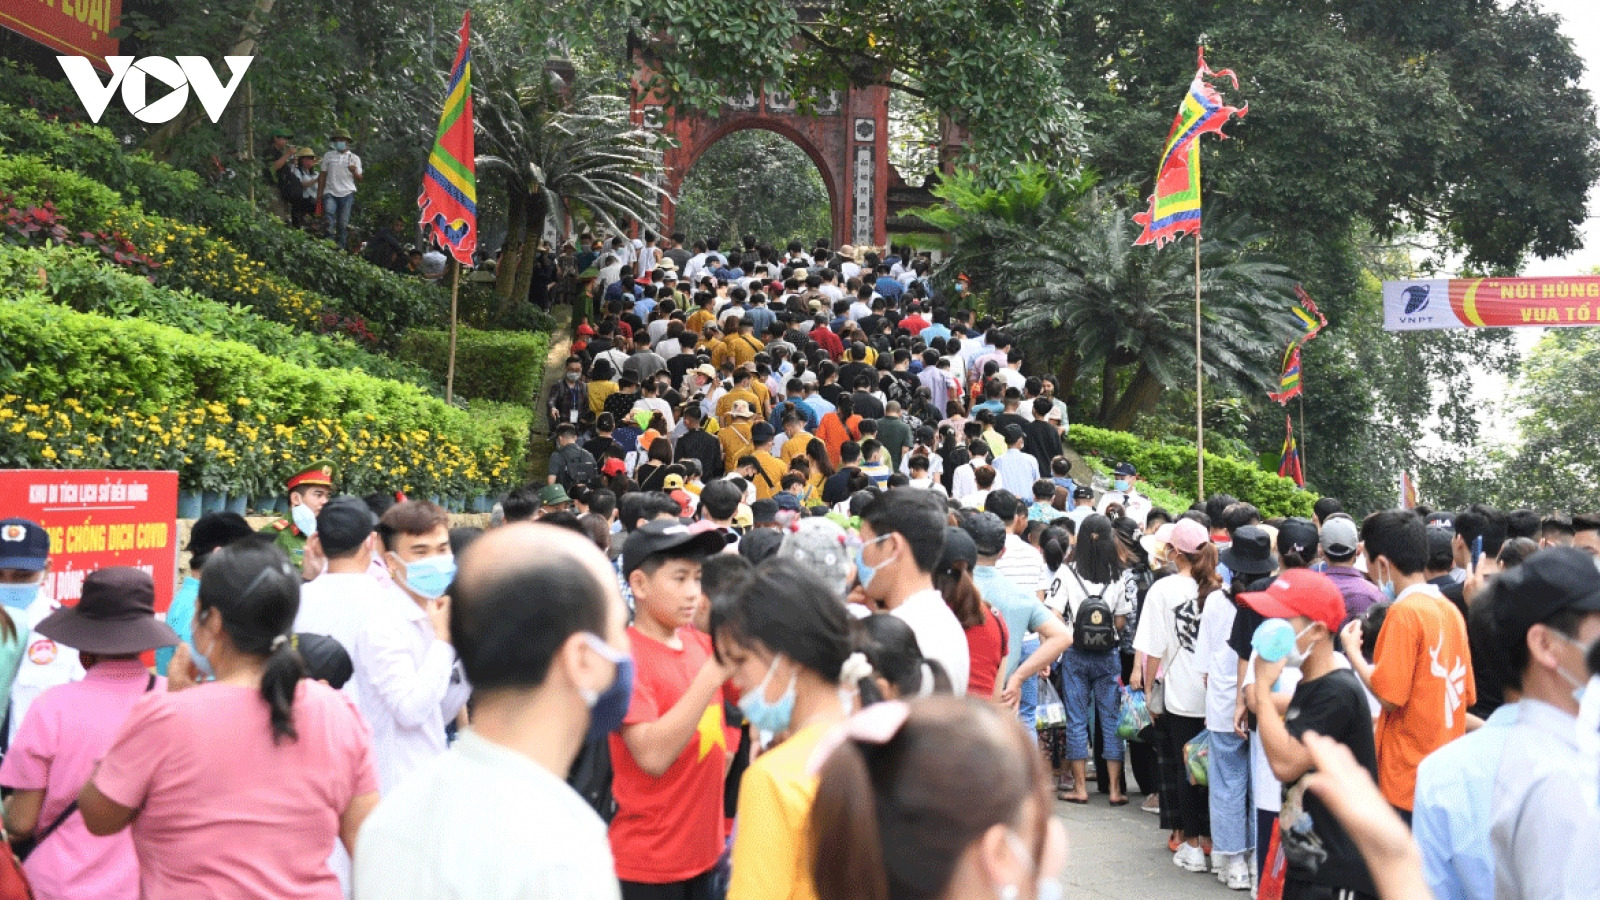 Tens of thousands flock to Hung Kings’ Temple for annual festival